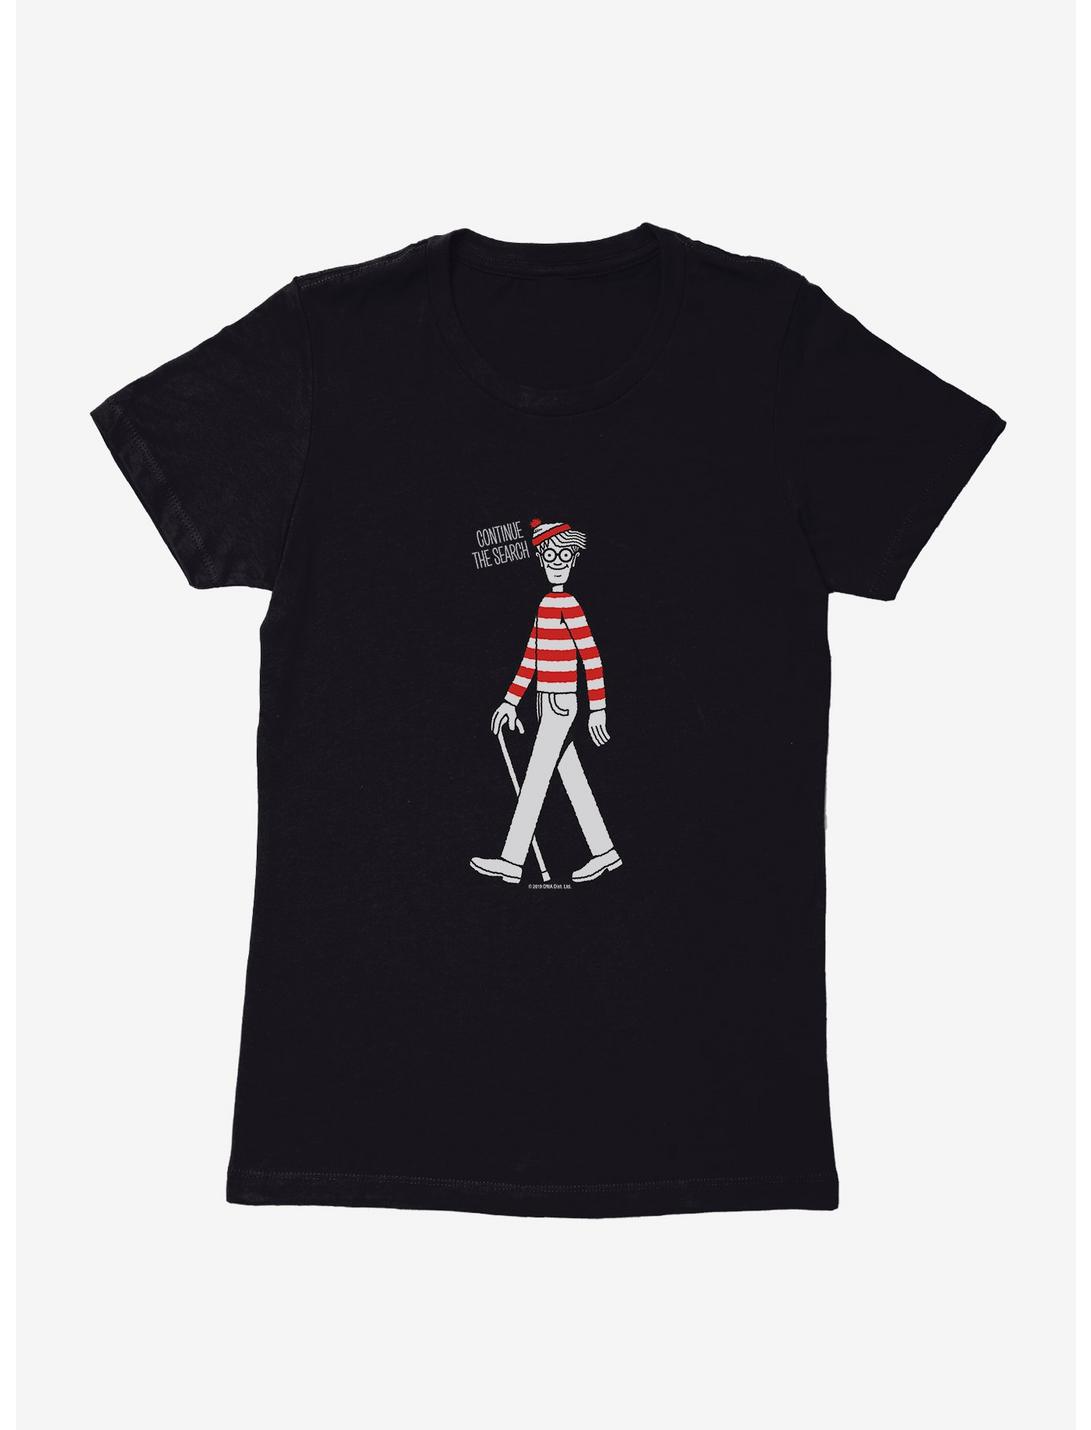 Where's Waldo? The Search Continues Womens T-Shirt, BLACK, hi-res